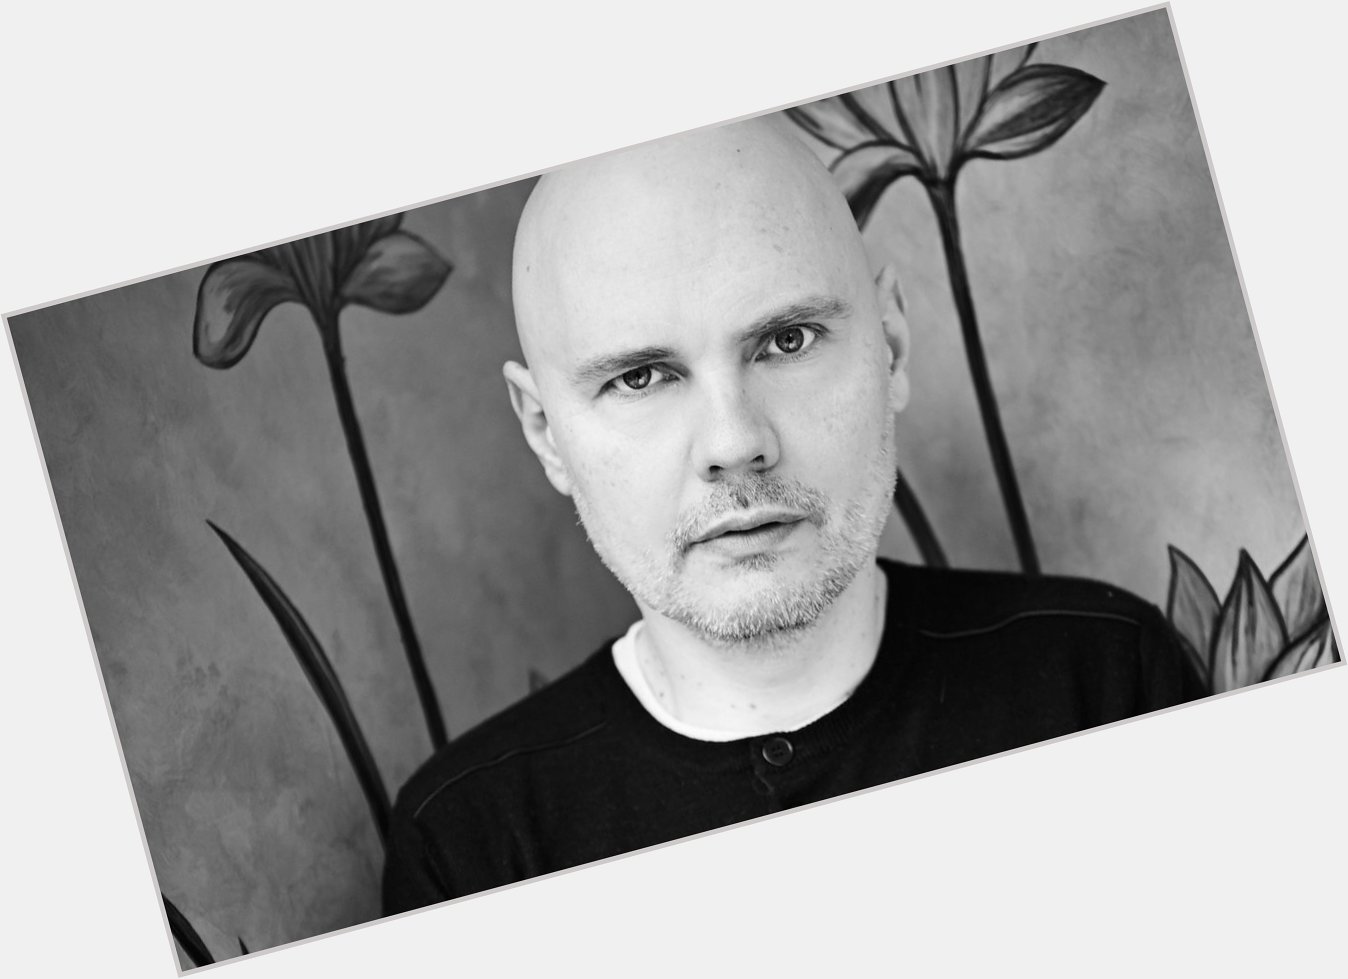  He used to bee-ee a little booooyyyy... But now he\s all grown up. Happy birthday to Billy Corgan! 